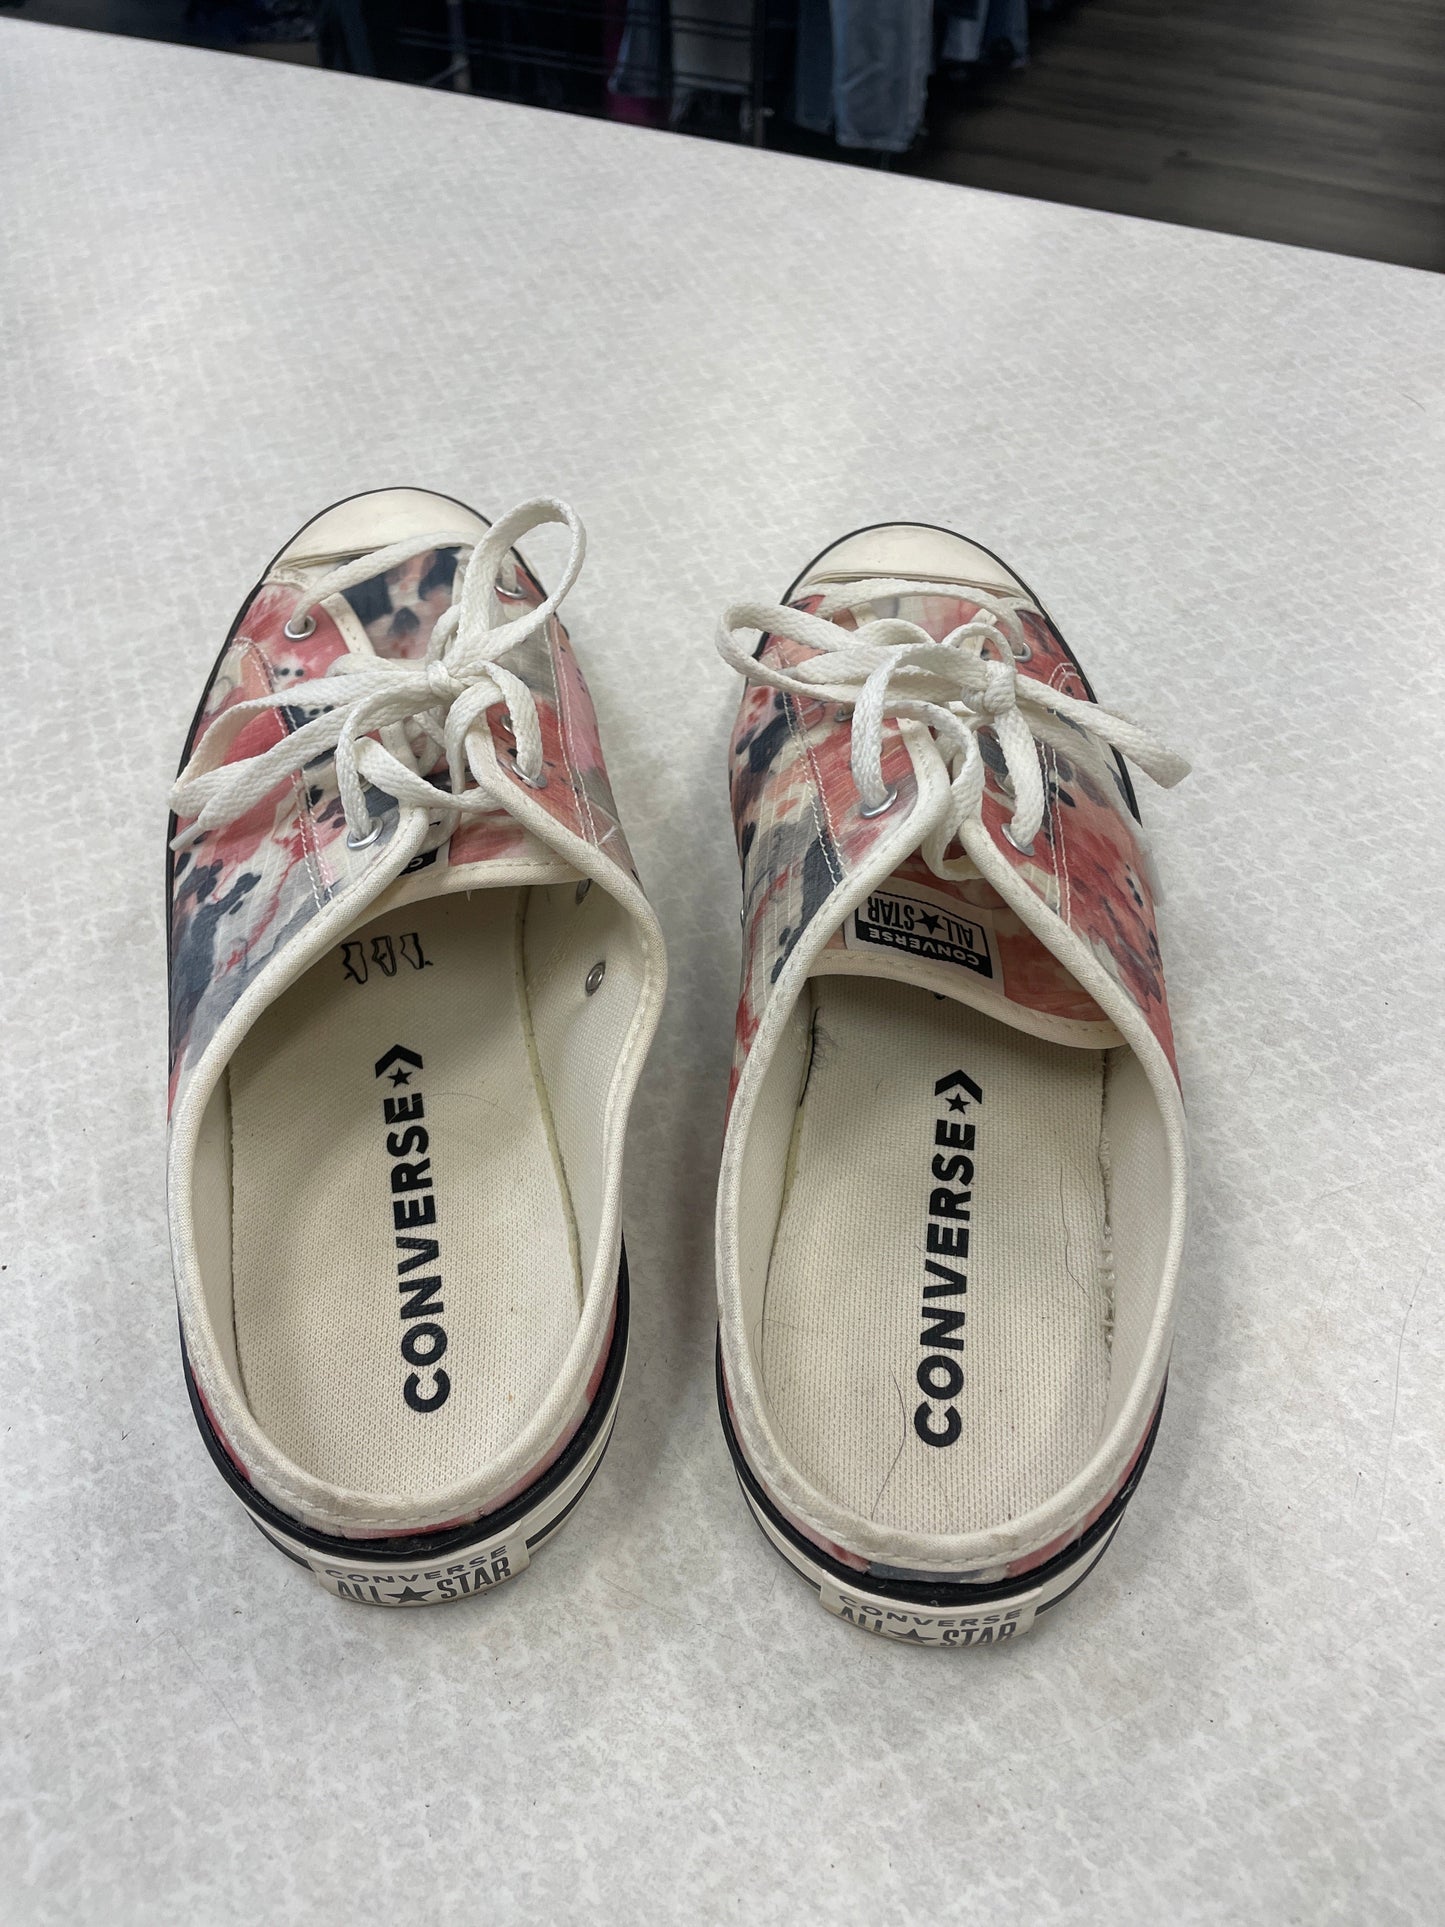 Multi-colored Shoes Flats Converse, Size 10